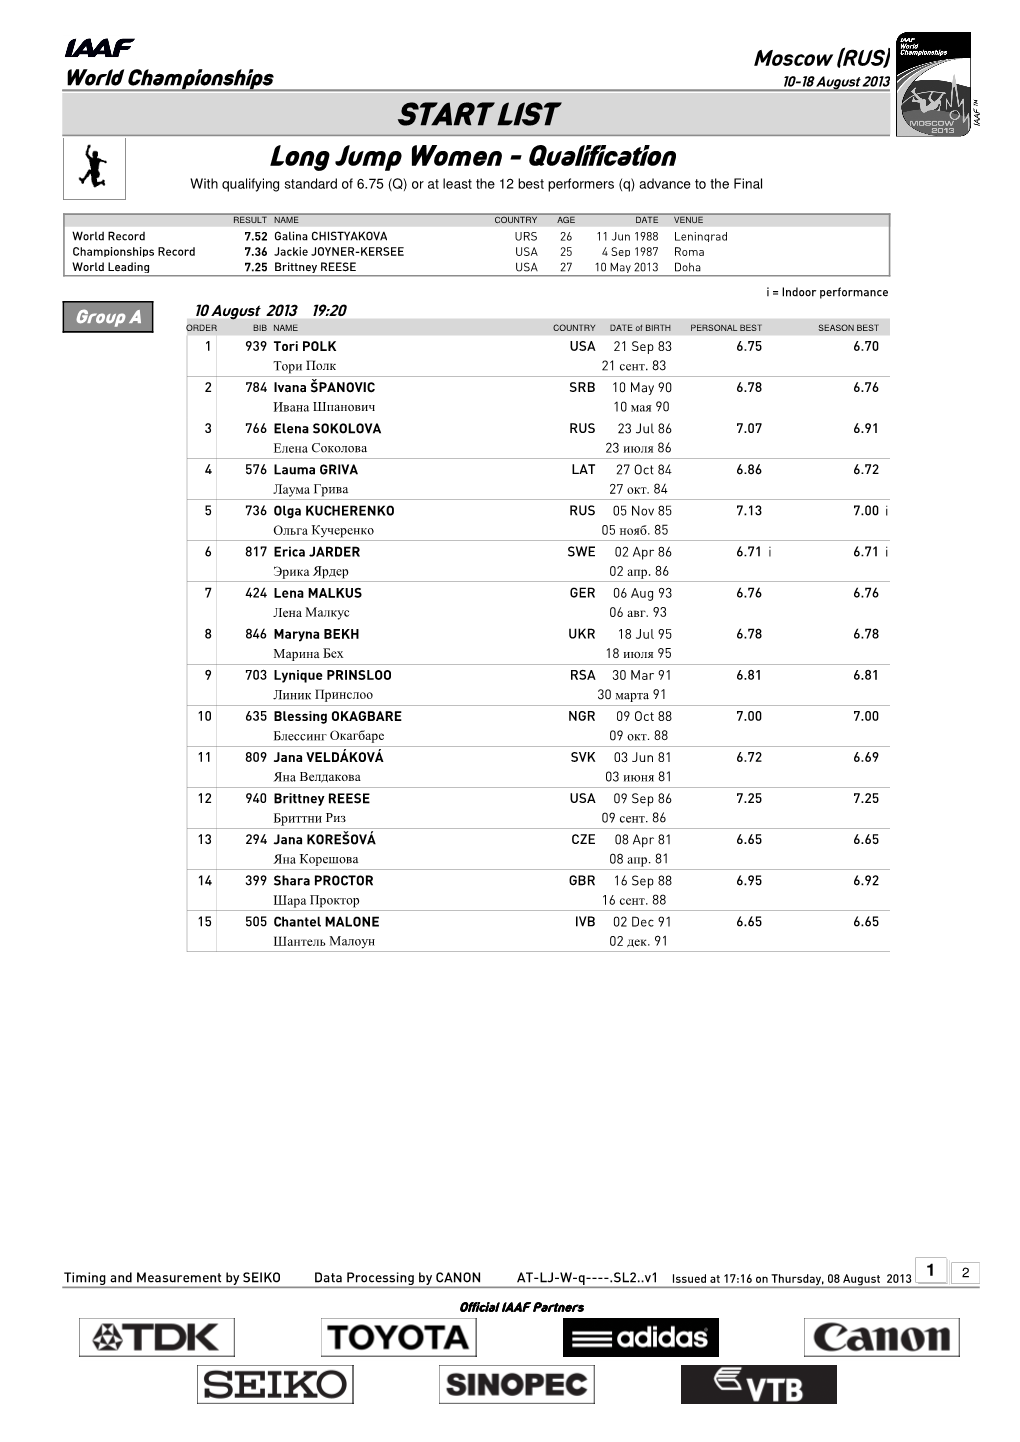 START LIST Long Jump Women - Qualification with Qualifying Standard of 6.75 (Q) Or at Least the 12 Best Performers (Q) Advance to the Final